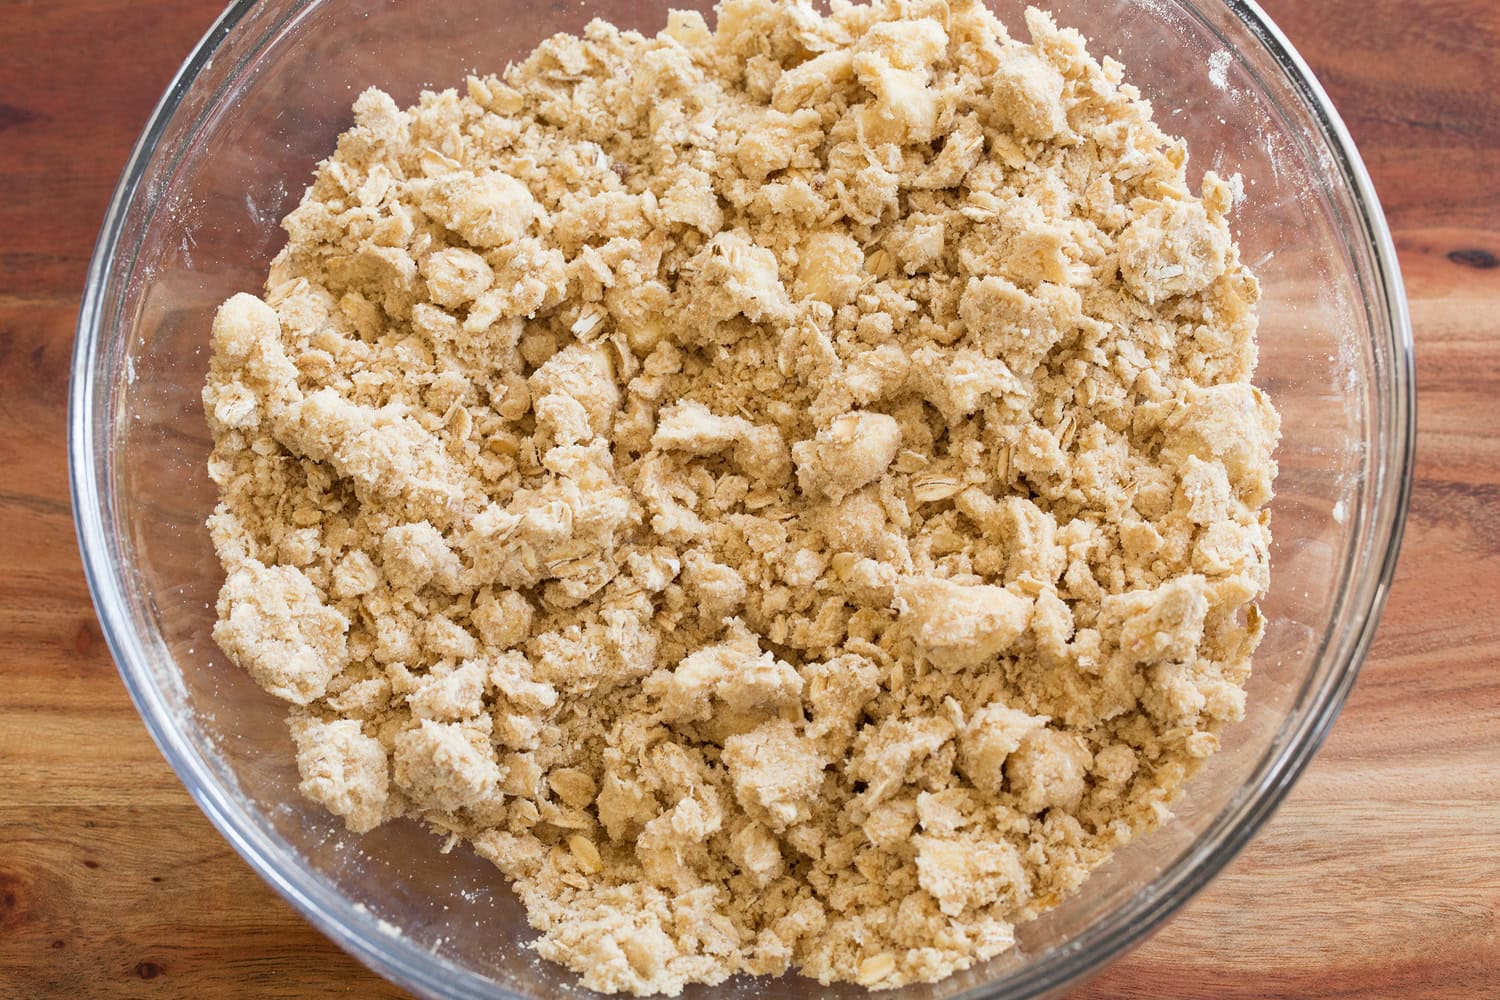 Crumble mixture after being mixed with butter.